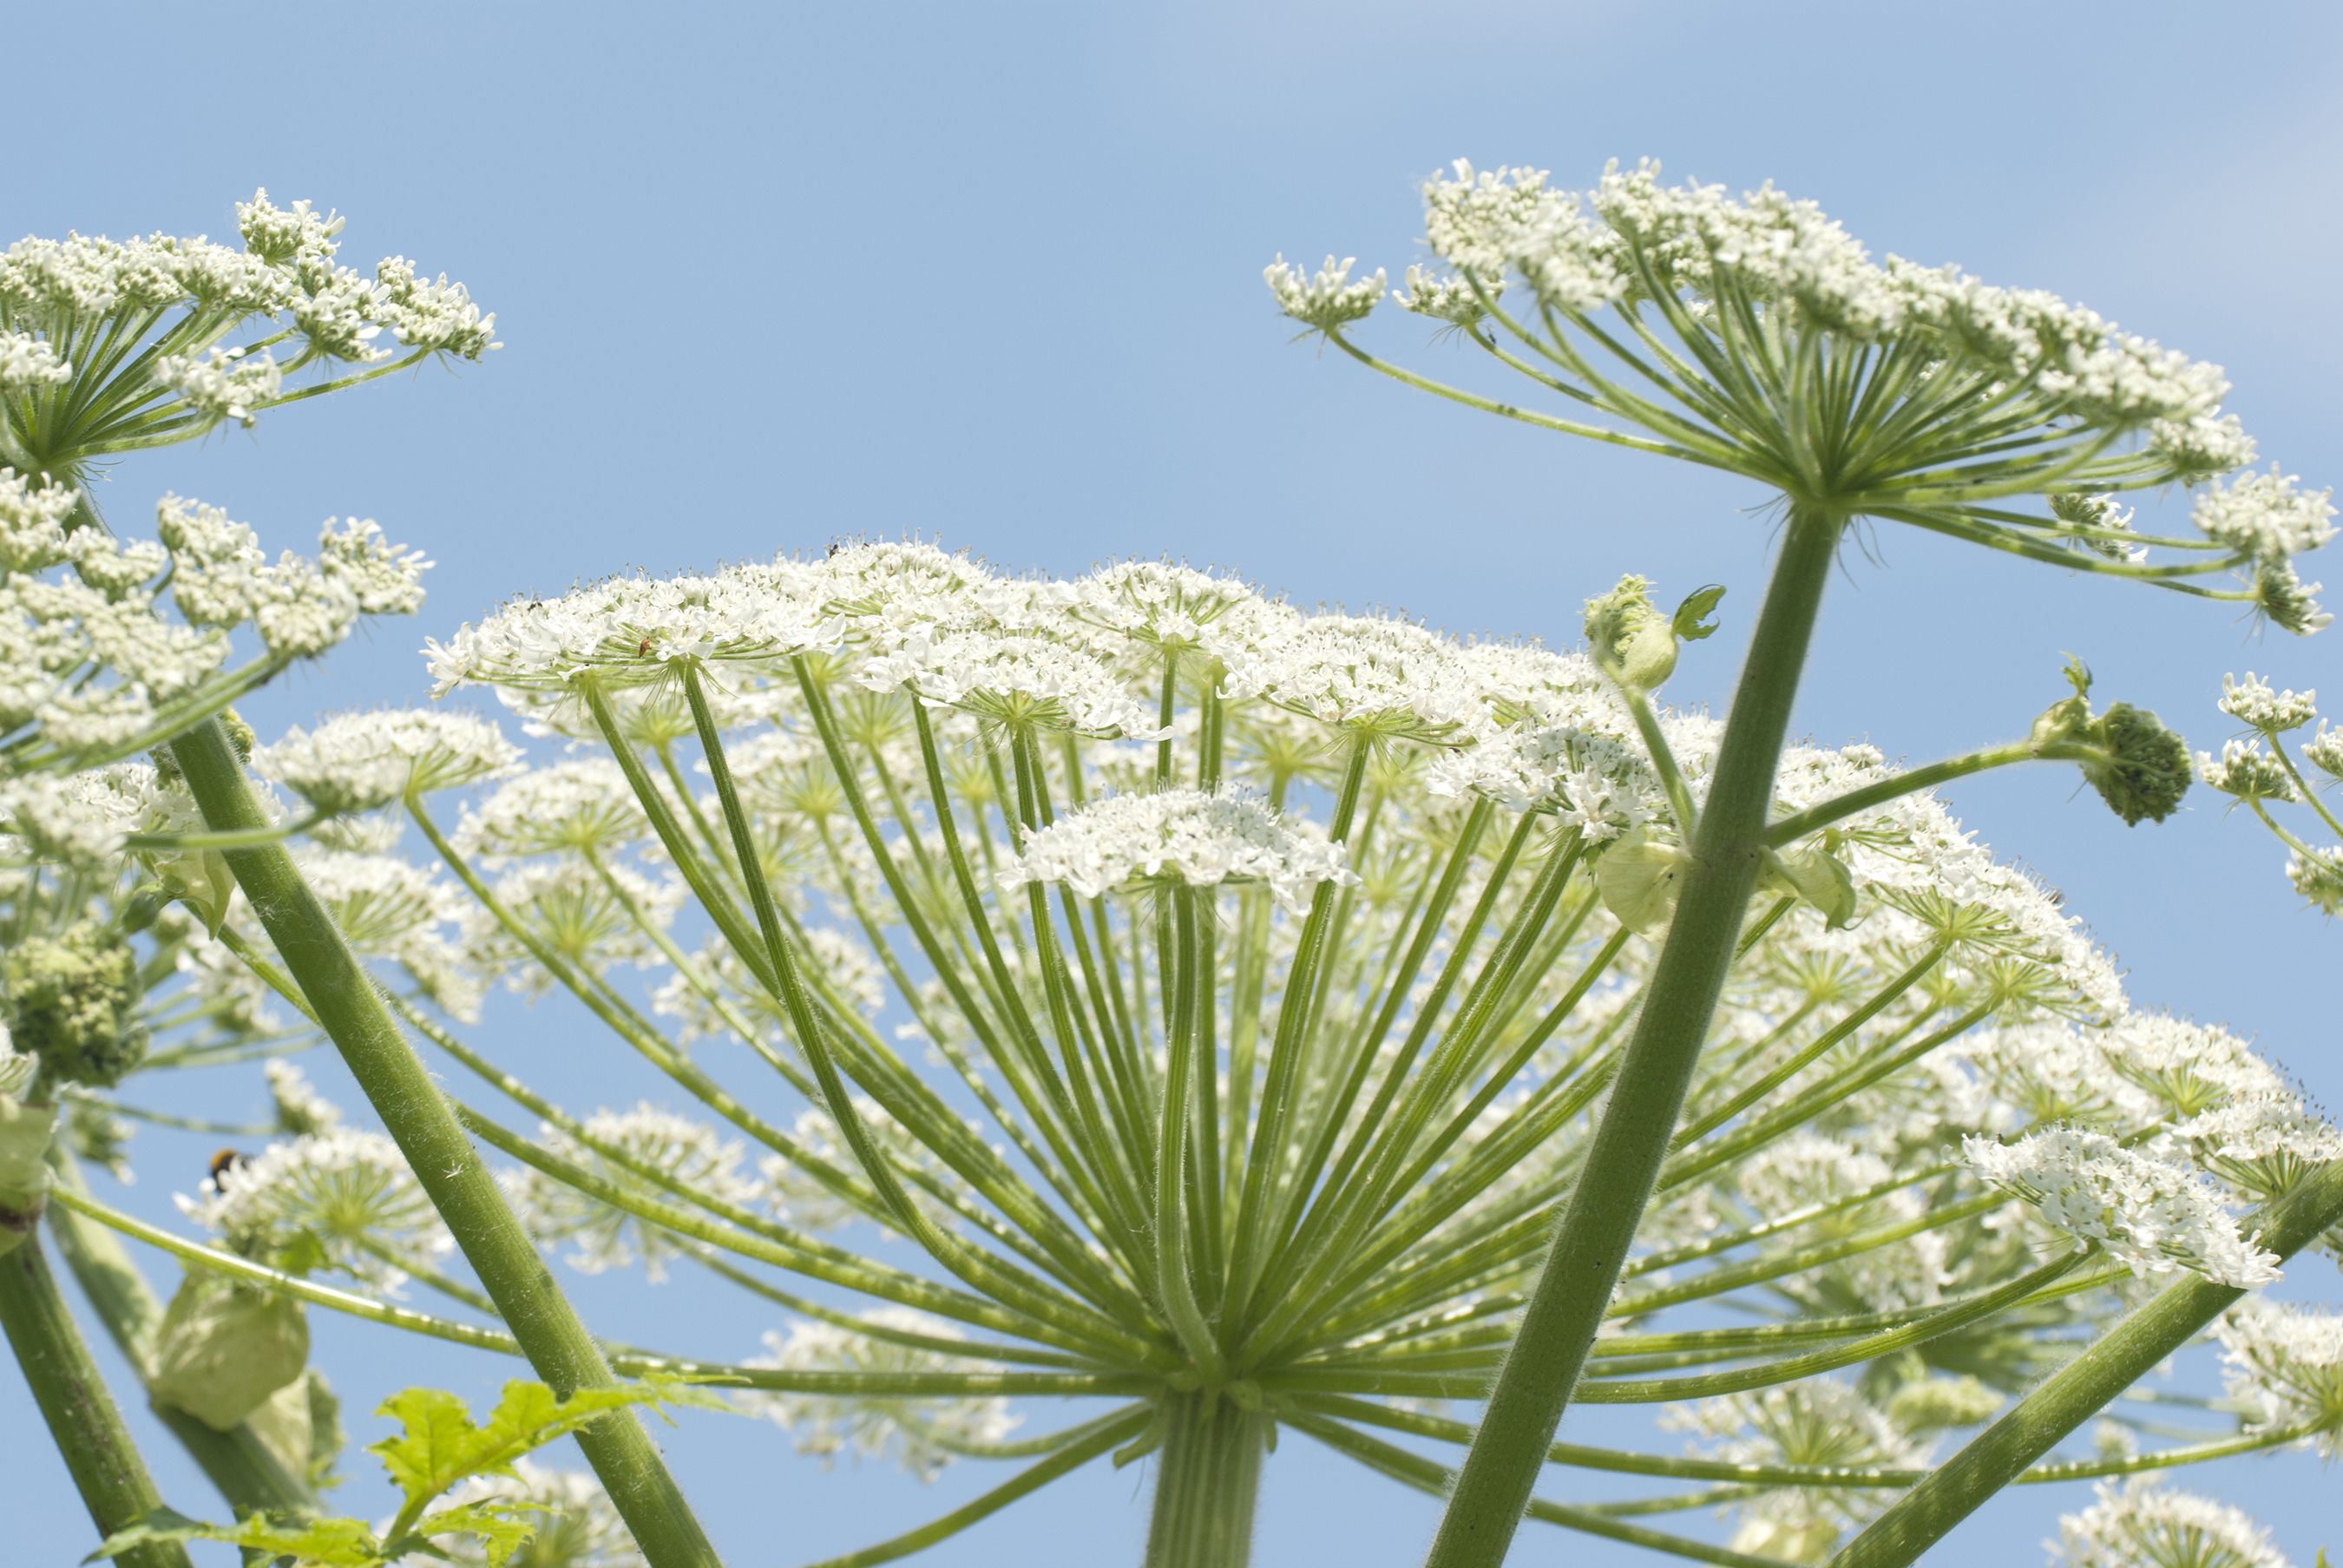 What Is Giant Hogweed? Identification, & Preventing Burns